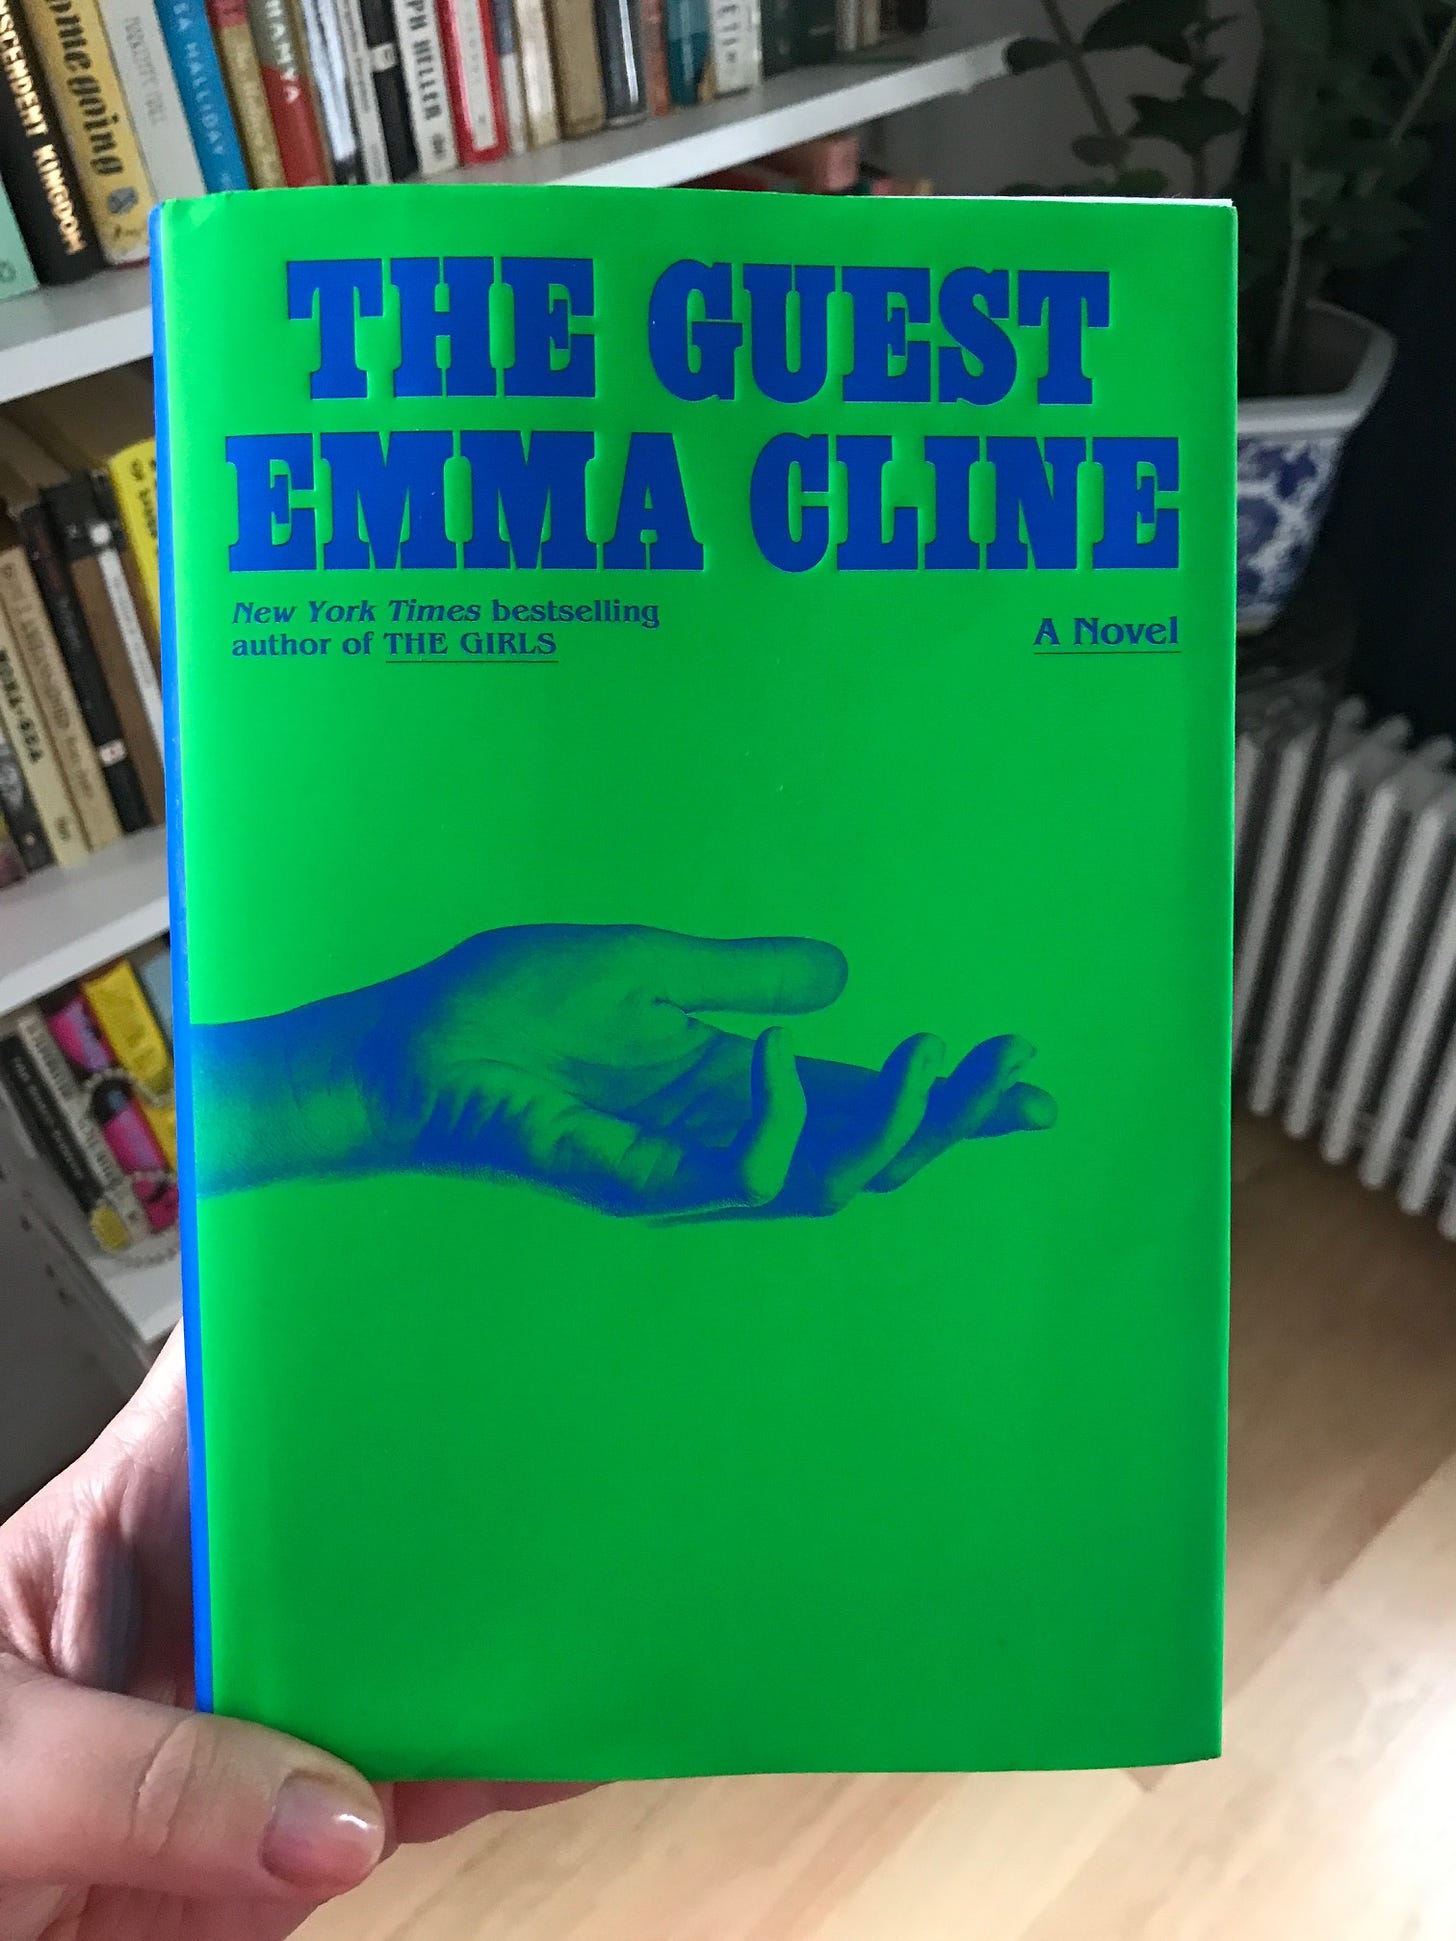 Holding a copy of Emma Cline's The Guest, which is bright green and blue and has the image of an outstretched hand on the cover.